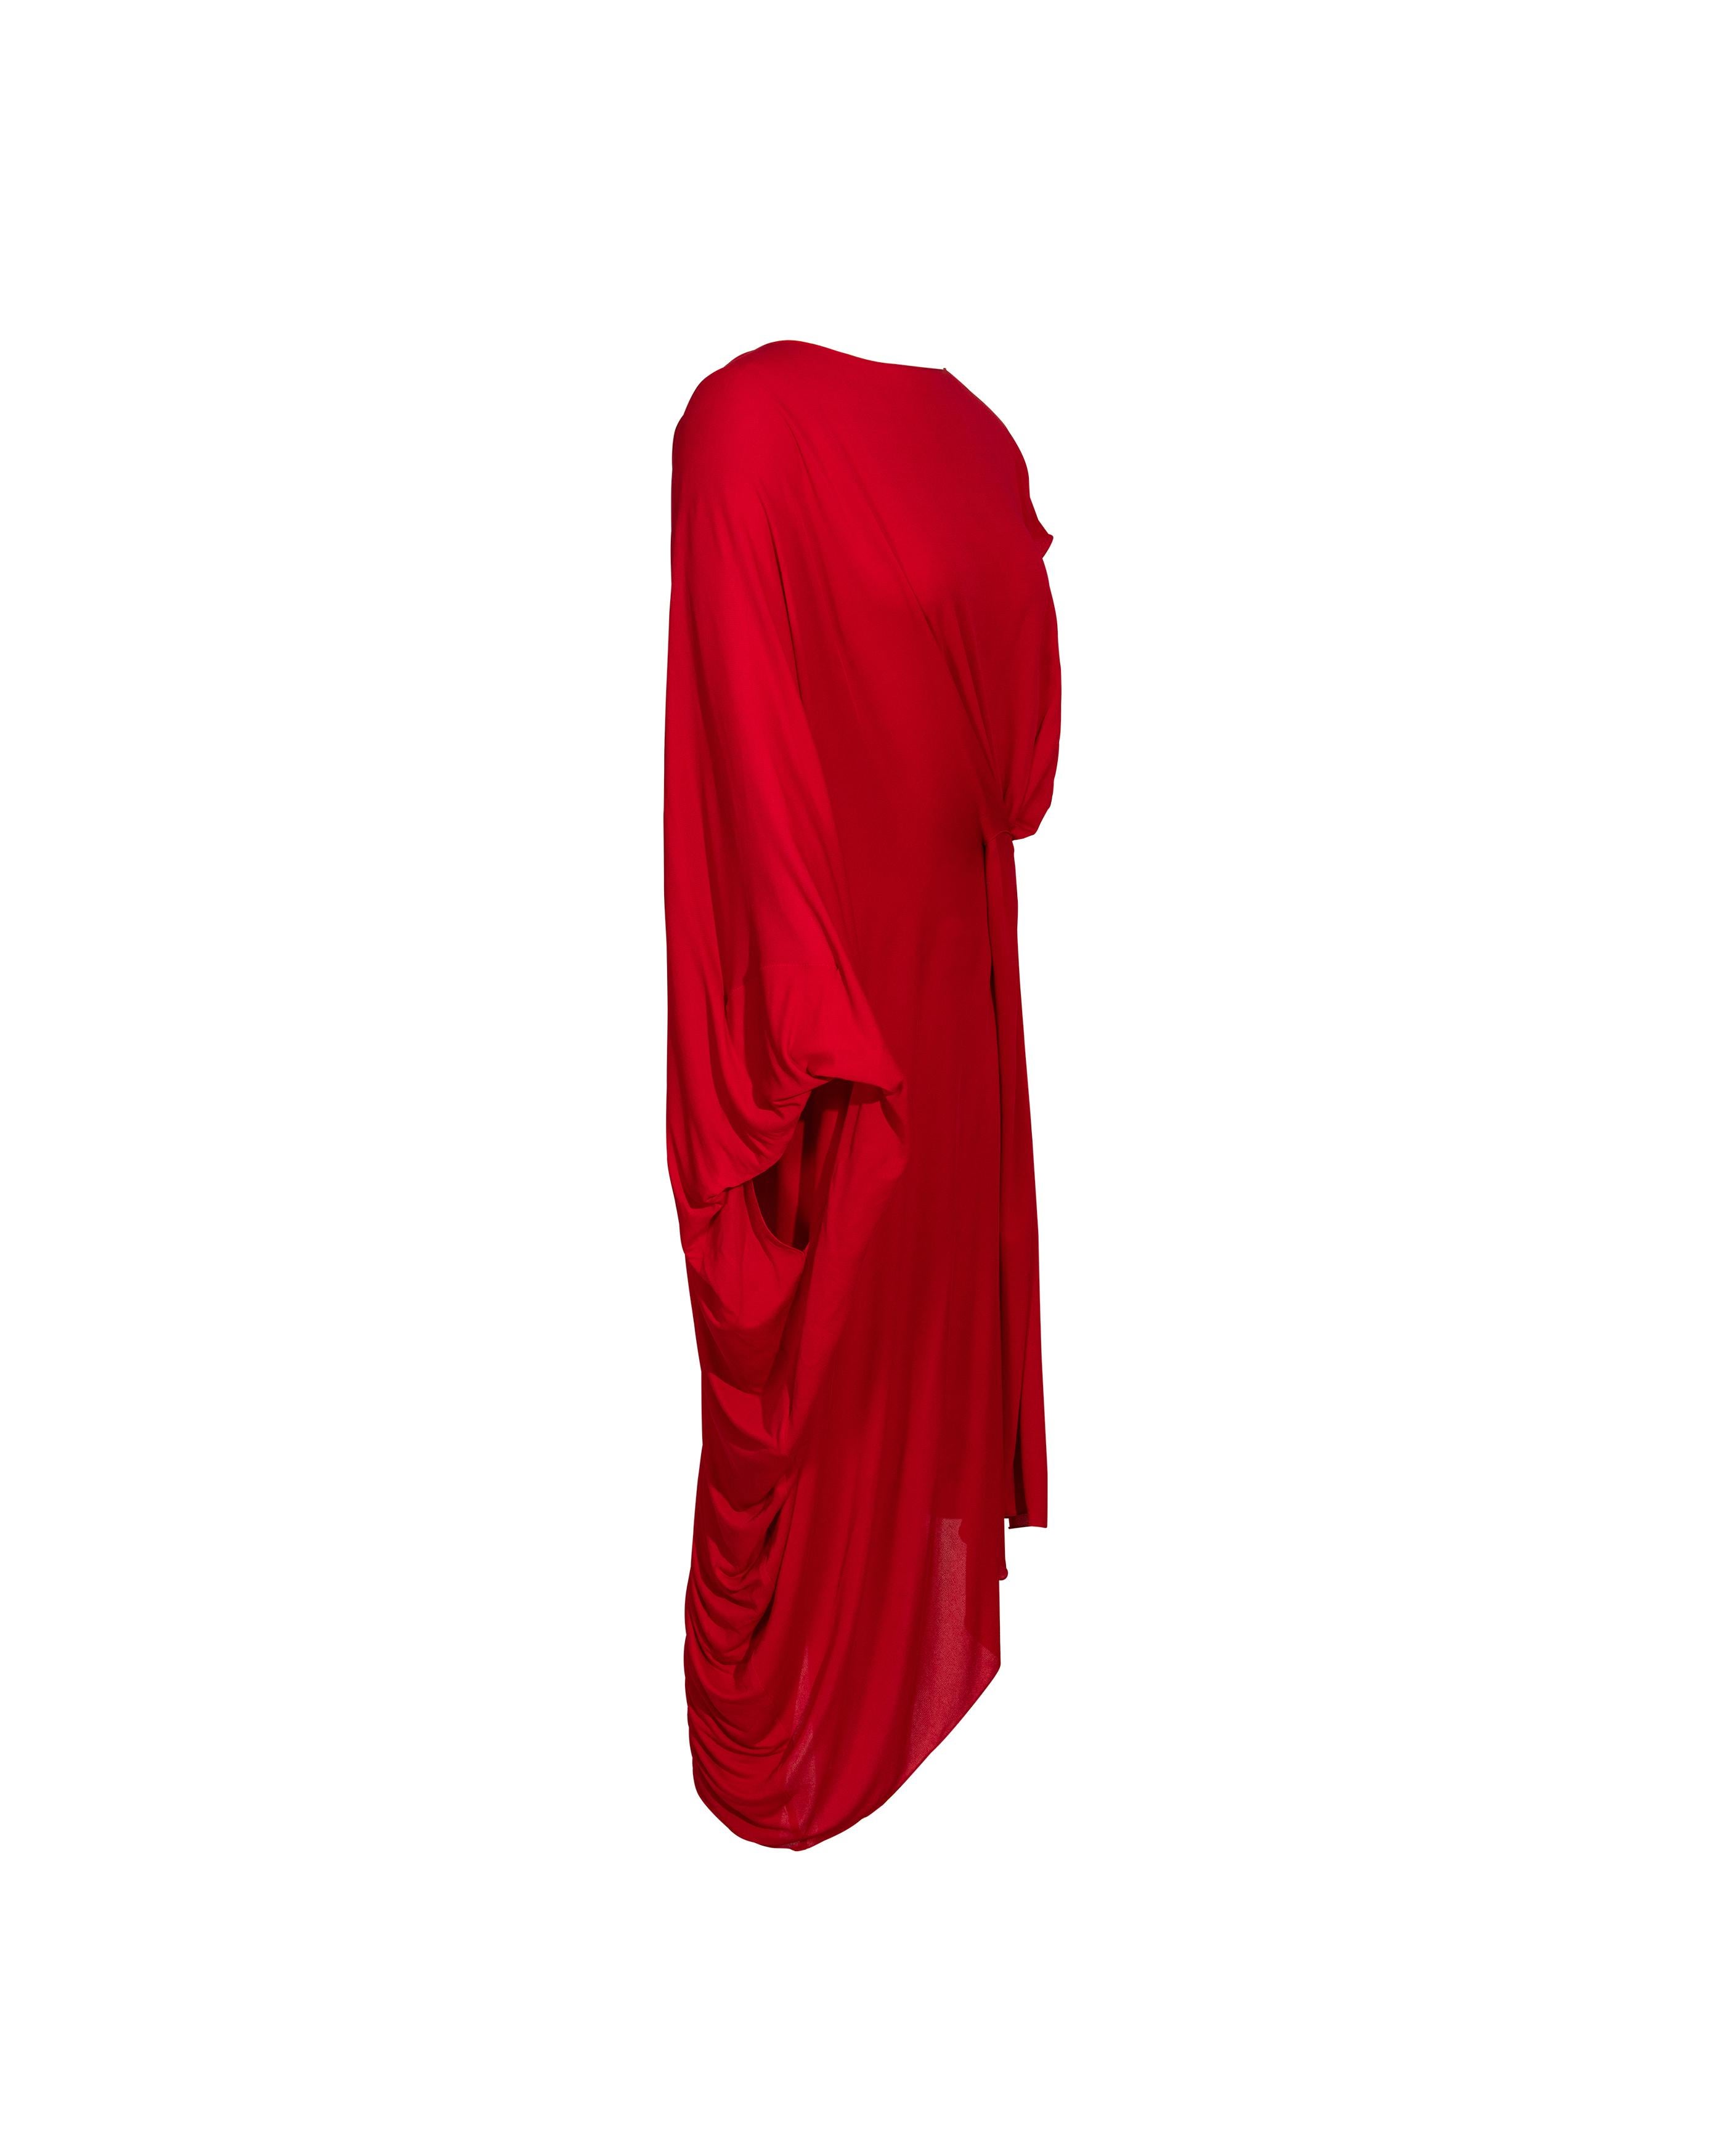 S/S 2009 Maison Martin Margiela Red Jersey Asymmetrical Drape Dress In Good Condition For Sale In North Hollywood, CA